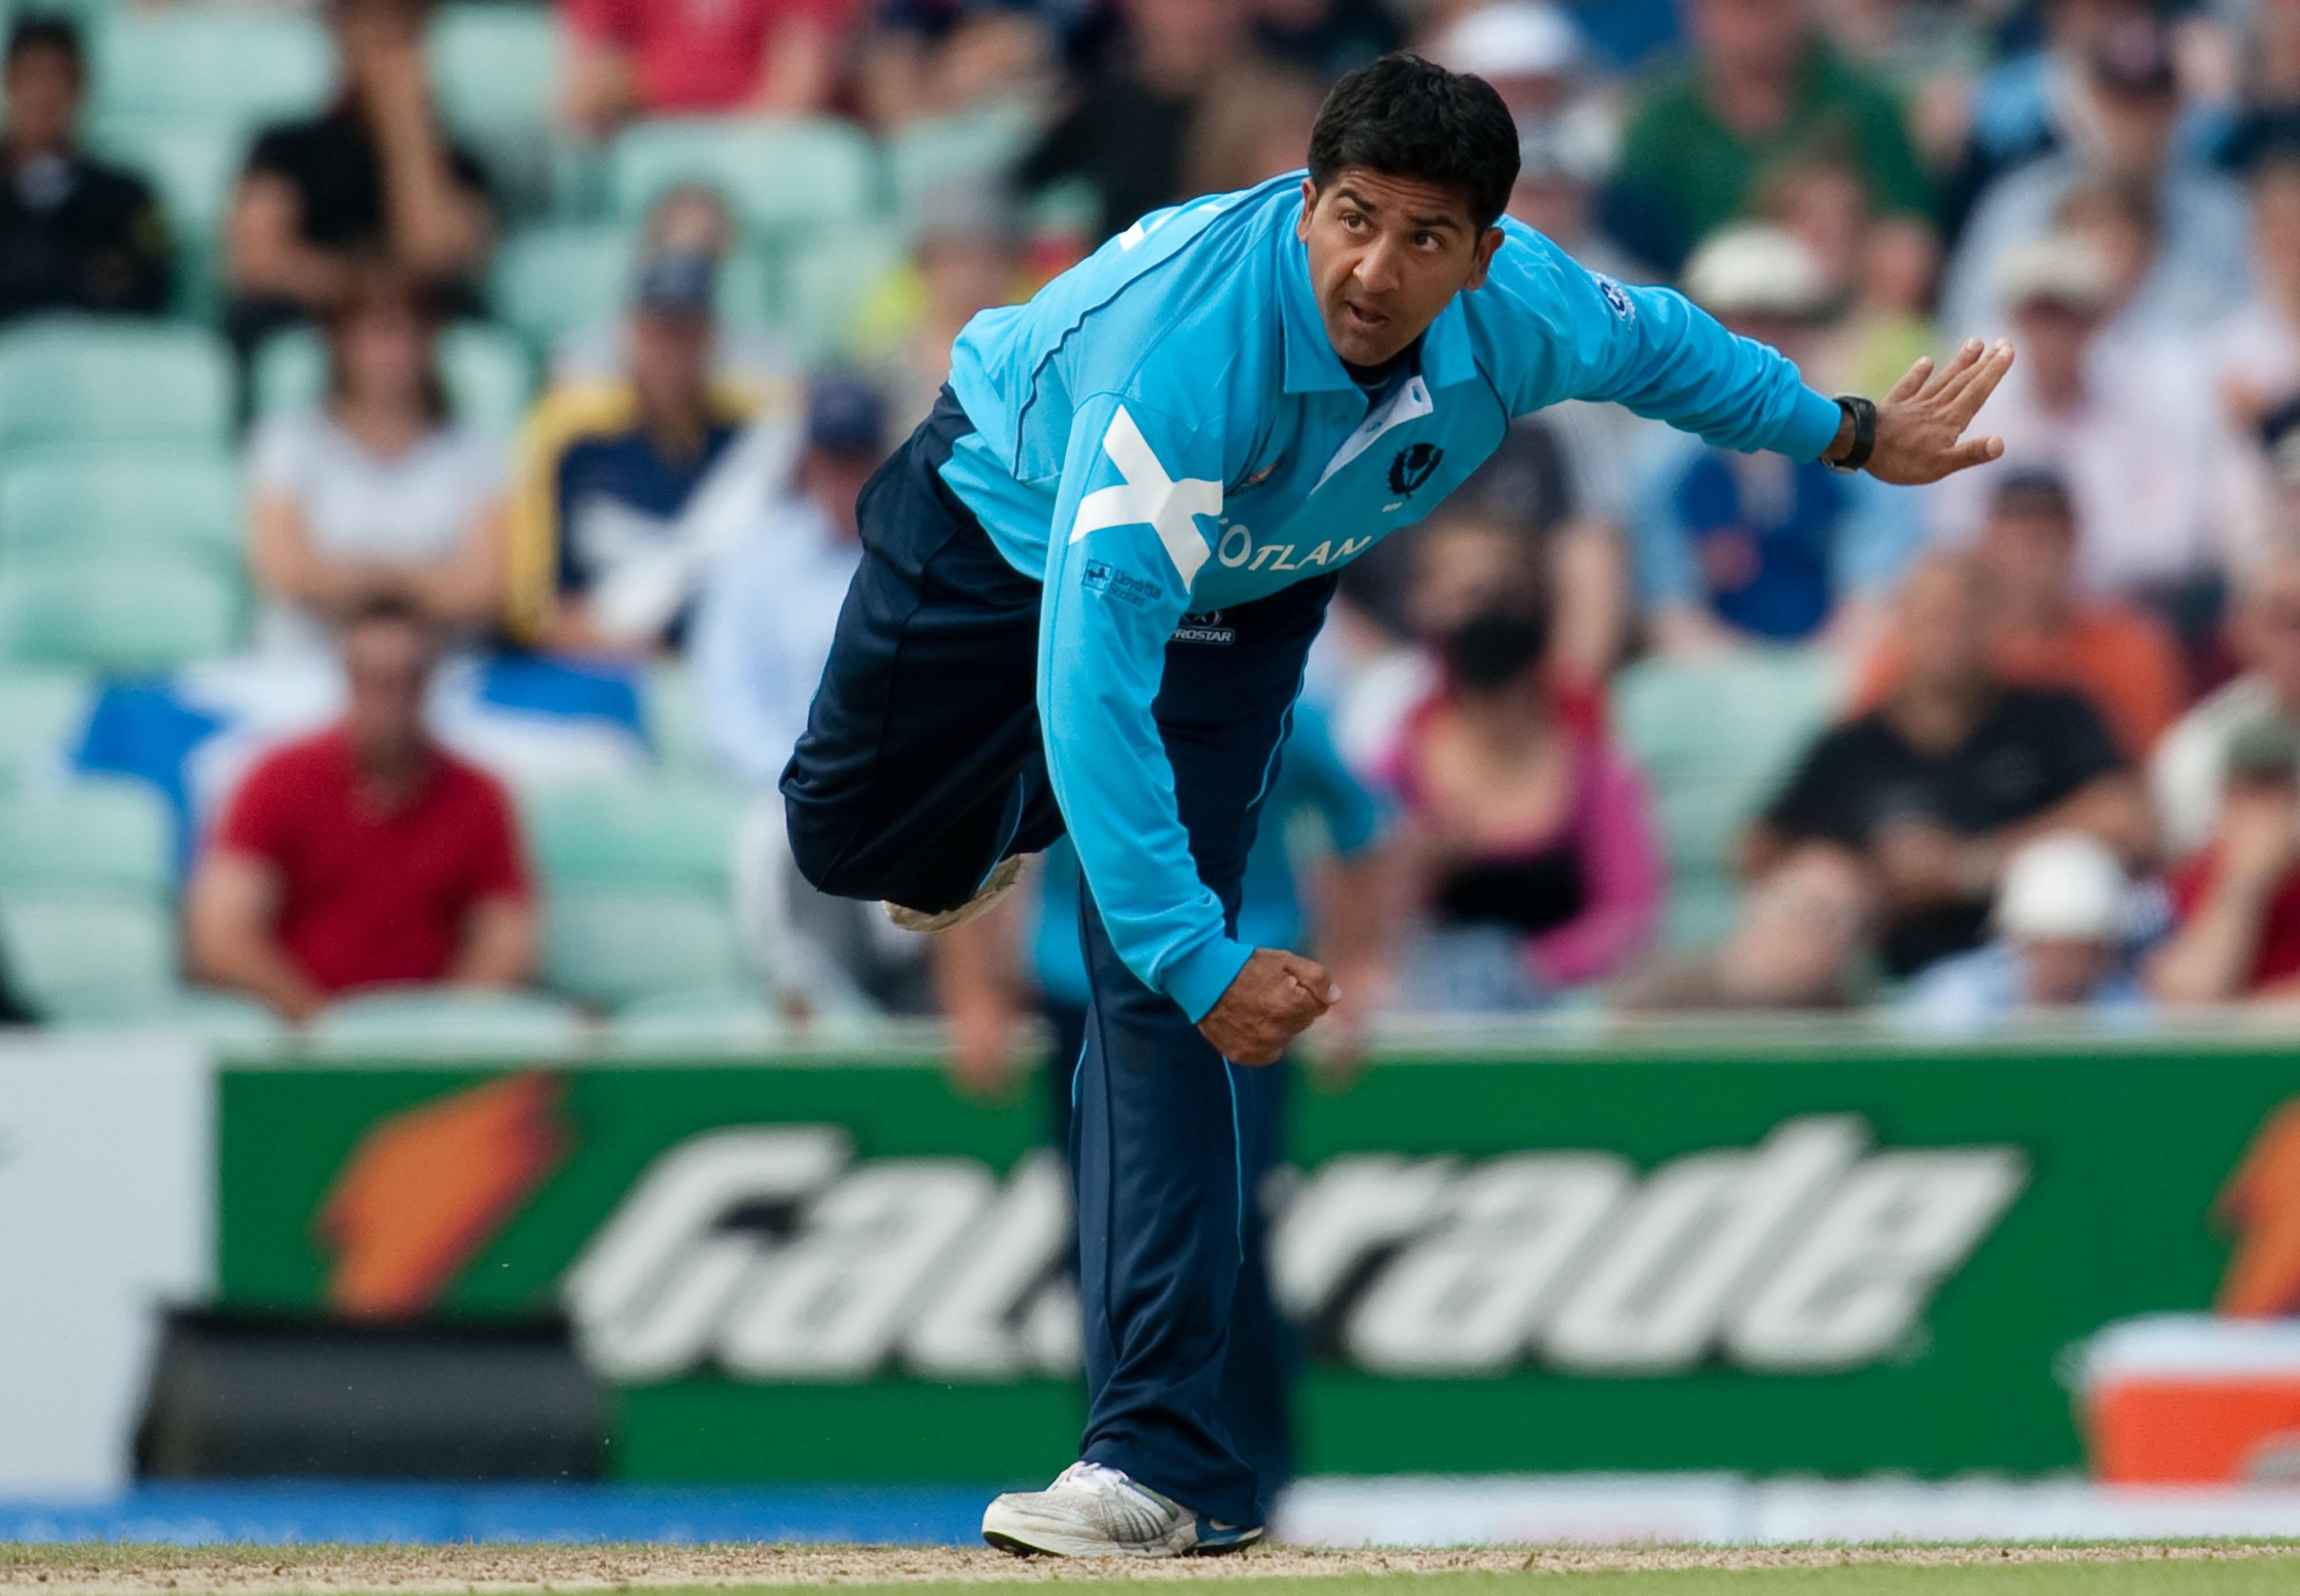 Scotland’s all-time leading wicket-taker Majid Haq had called for an investigation (Gareth Copley/PA)